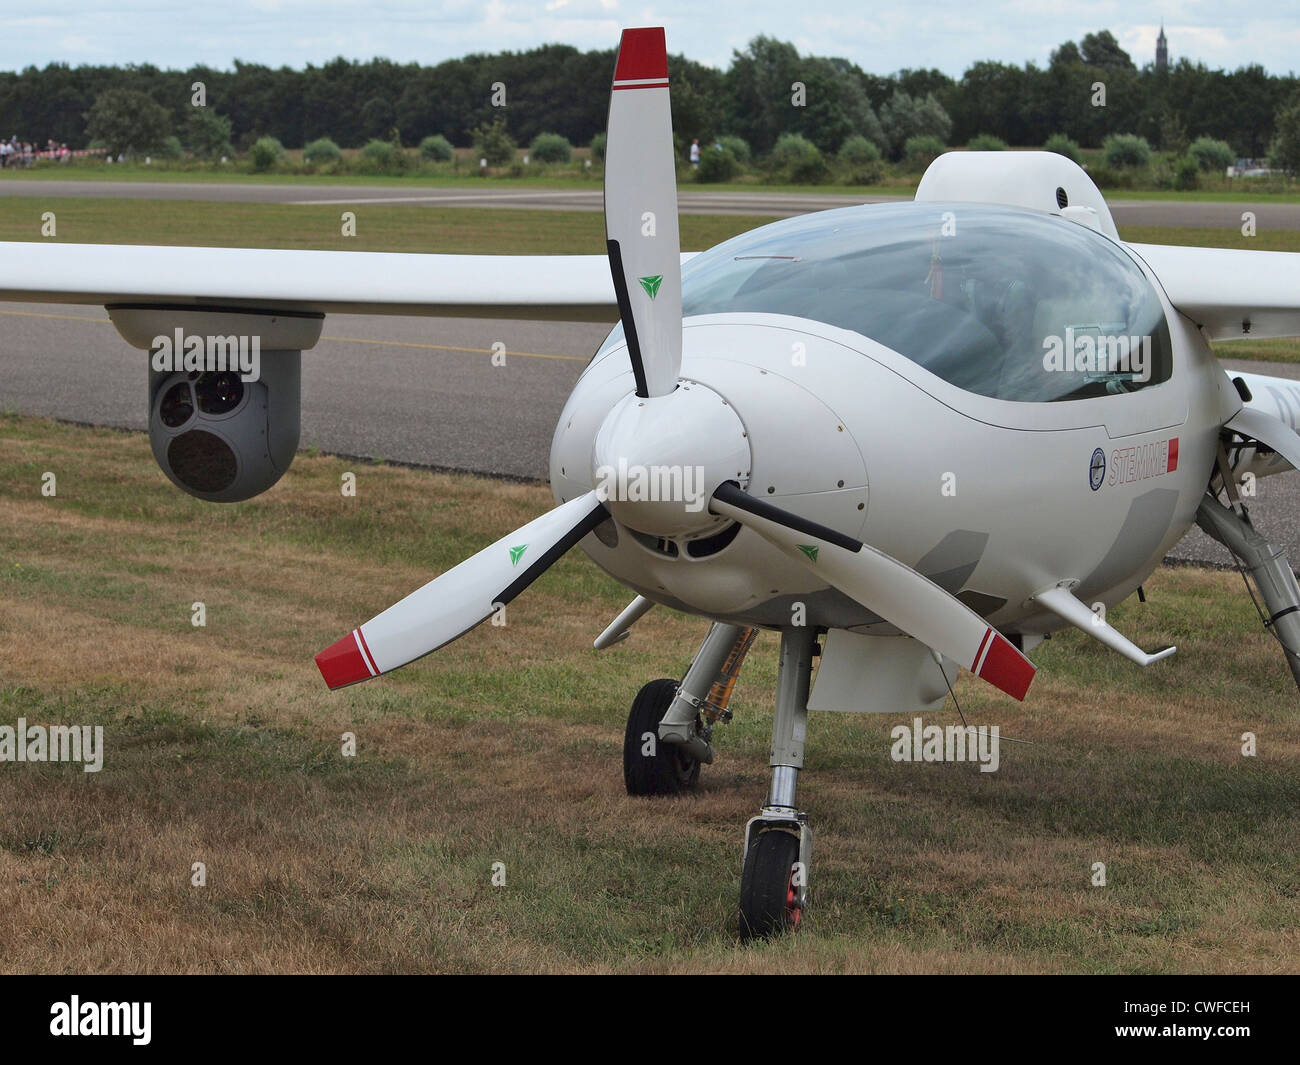 Stemme S6 motor glider aircraft equipped for aerial photography. Seppe airfield, the Netherlands Stock Photo